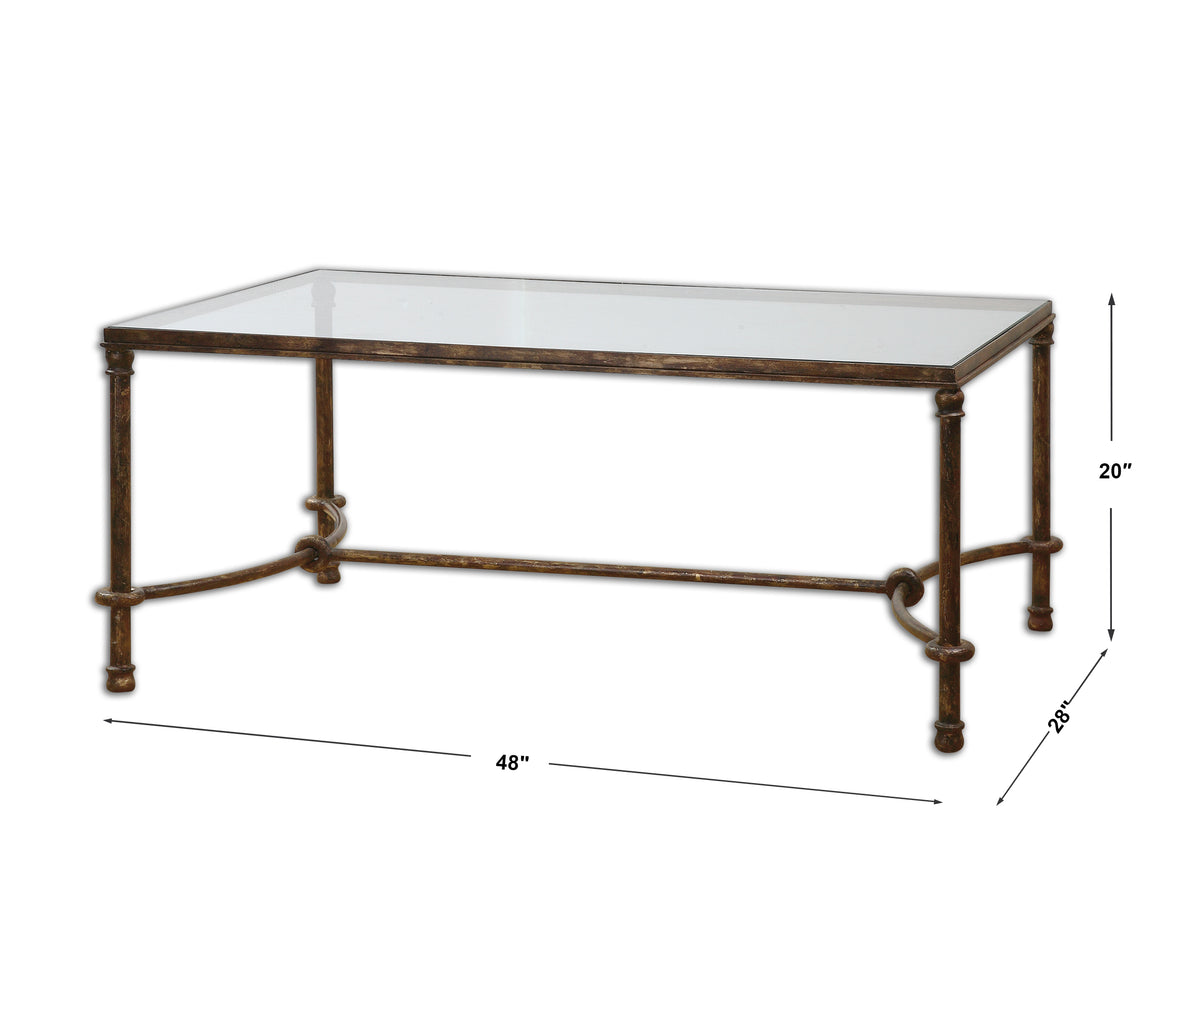 Uttermost Warring Iron Coffee Table